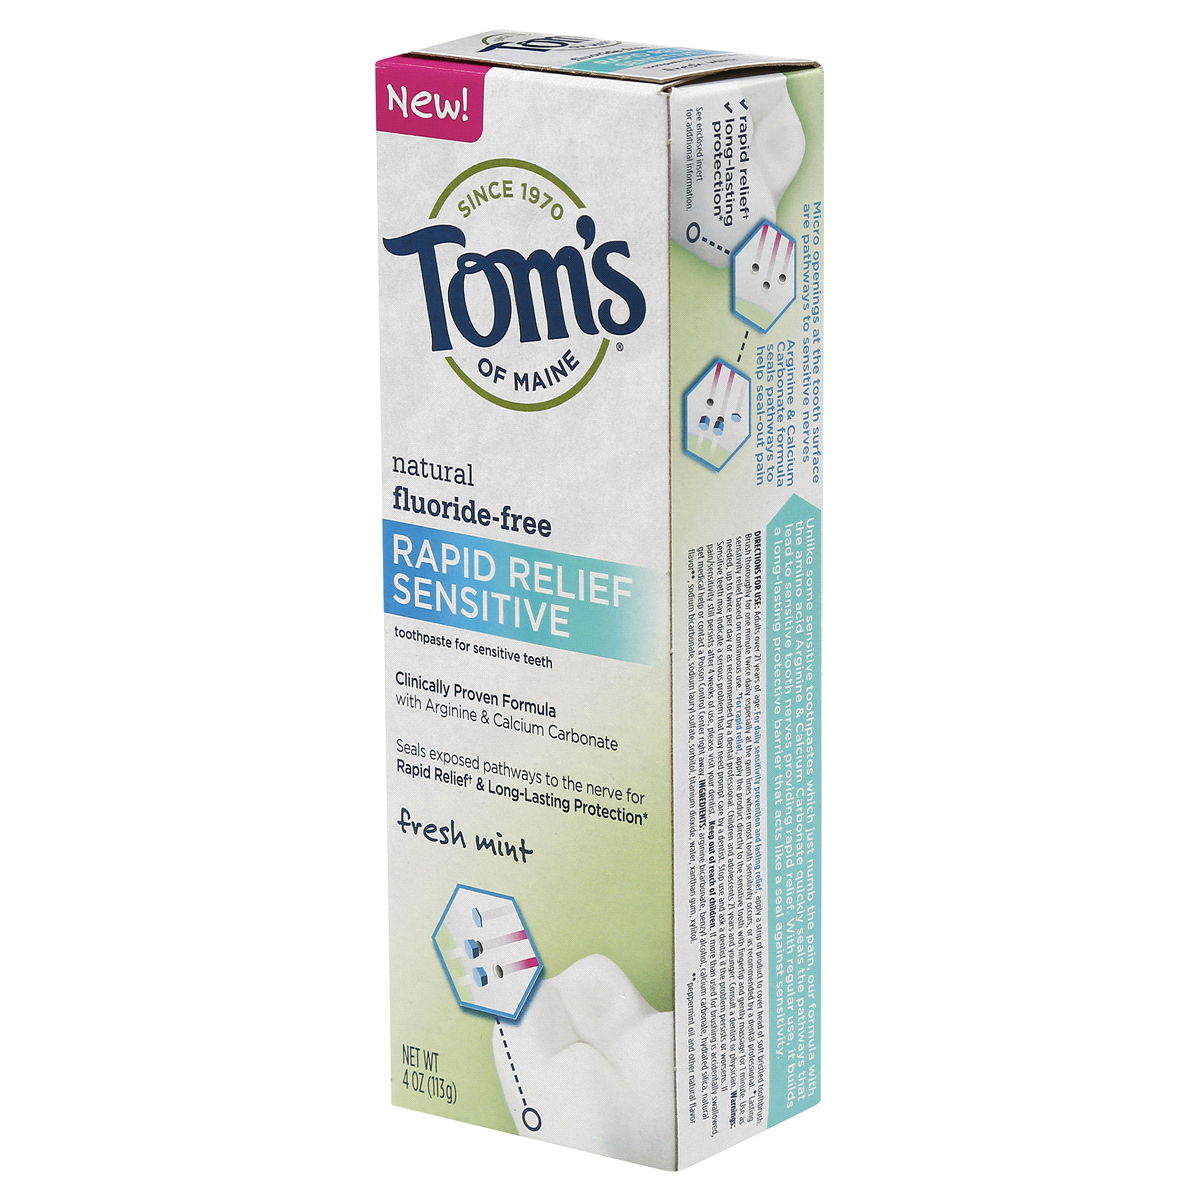 Tom's Of Maine Rapid Relief Sensitive Natural Fluoride-Free